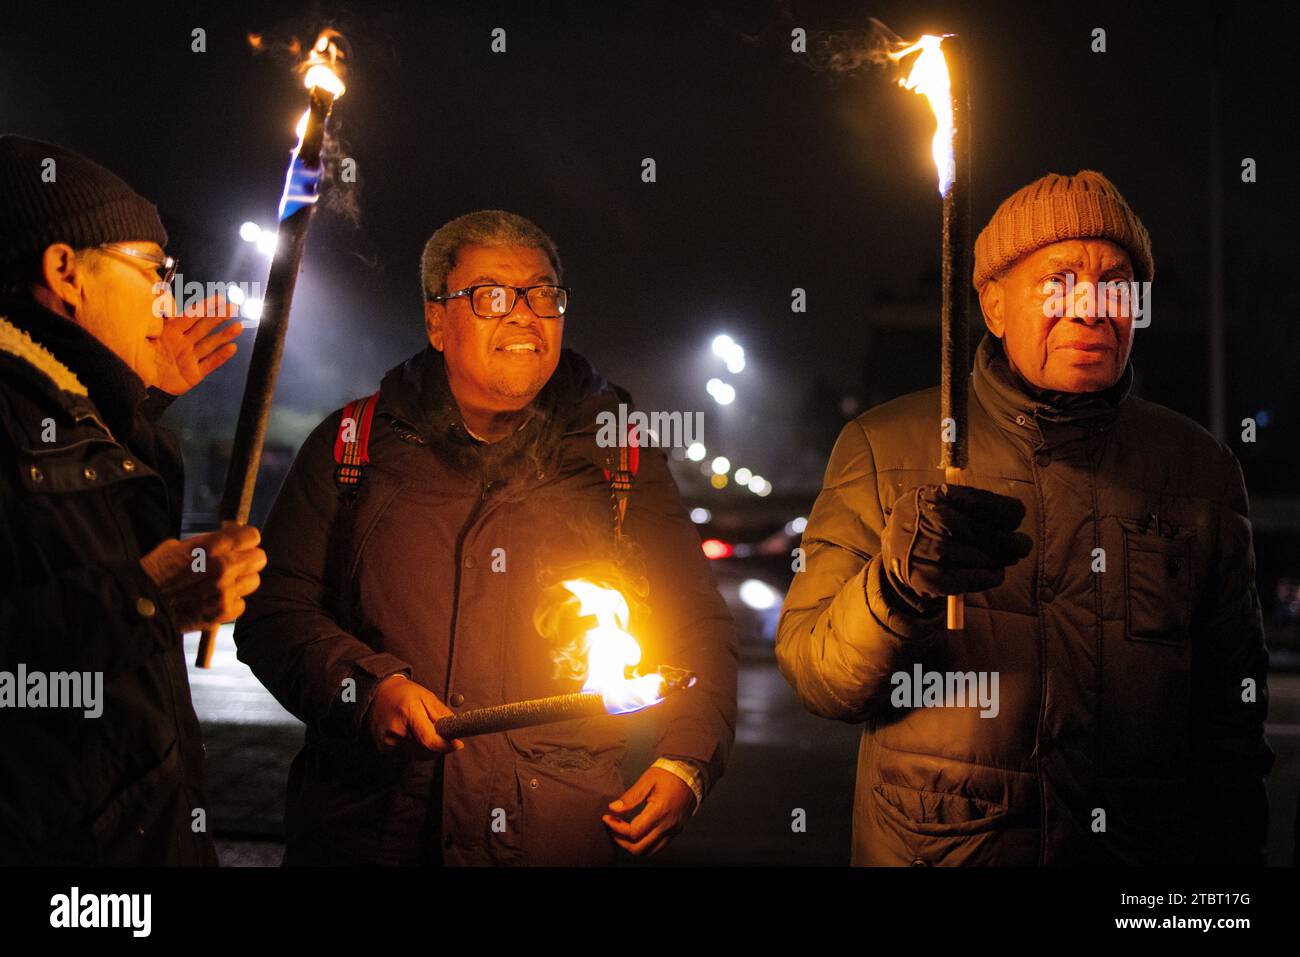 AMSTERDAM - The commemoration of the December murders. It has been 41 years since fifteen leading Surinamese were murdered under the rule of Desi Bouterse. ANP RAMON VAN FLYMEN netherlands out - belgium out Credit: ANP/Alamy Live News Stock Photo